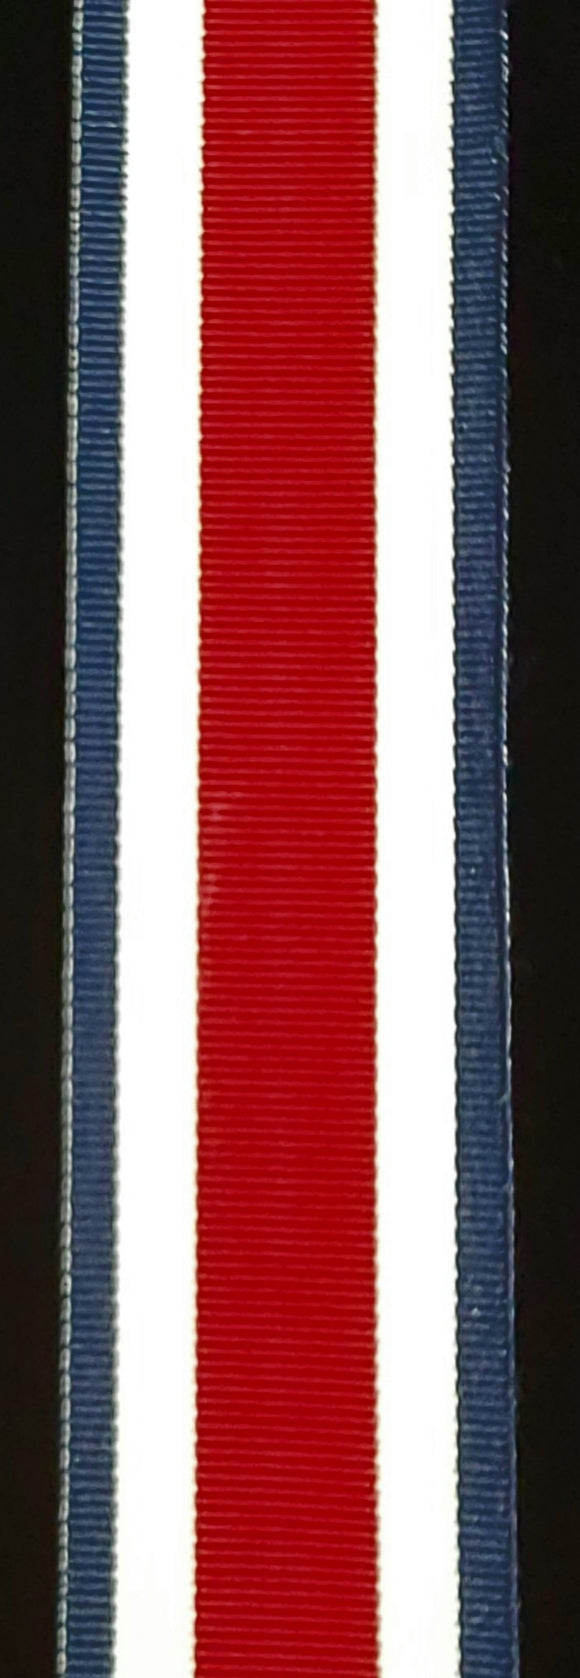 Ribbon, Corps of Commissioniares Long Service Medal